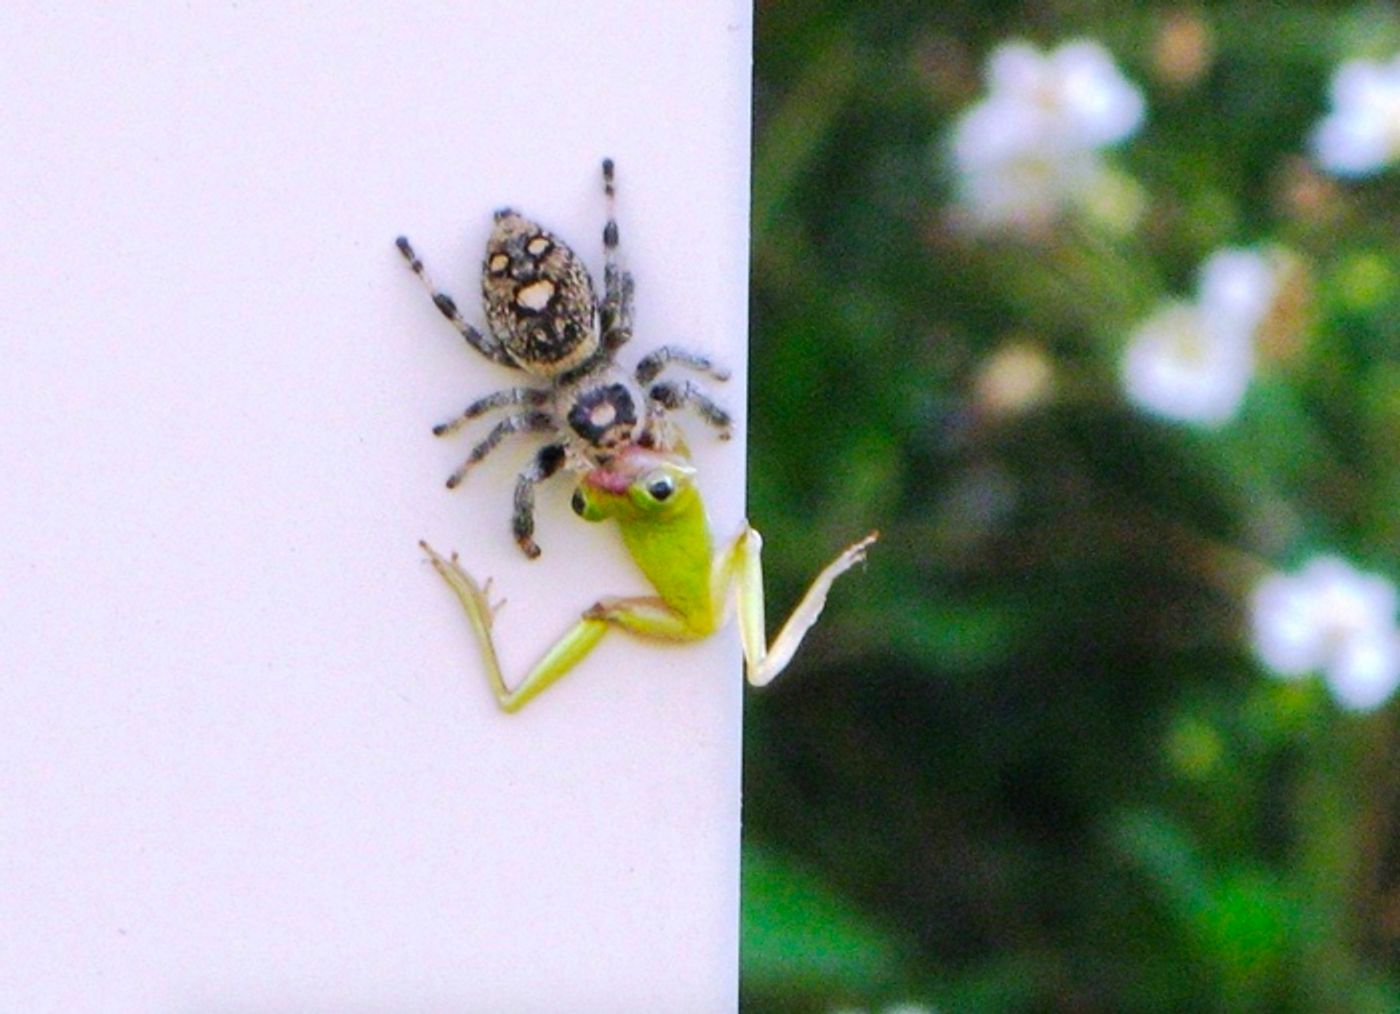 A regal jumping spider from Florida drags a frog up a wall to get eaten.